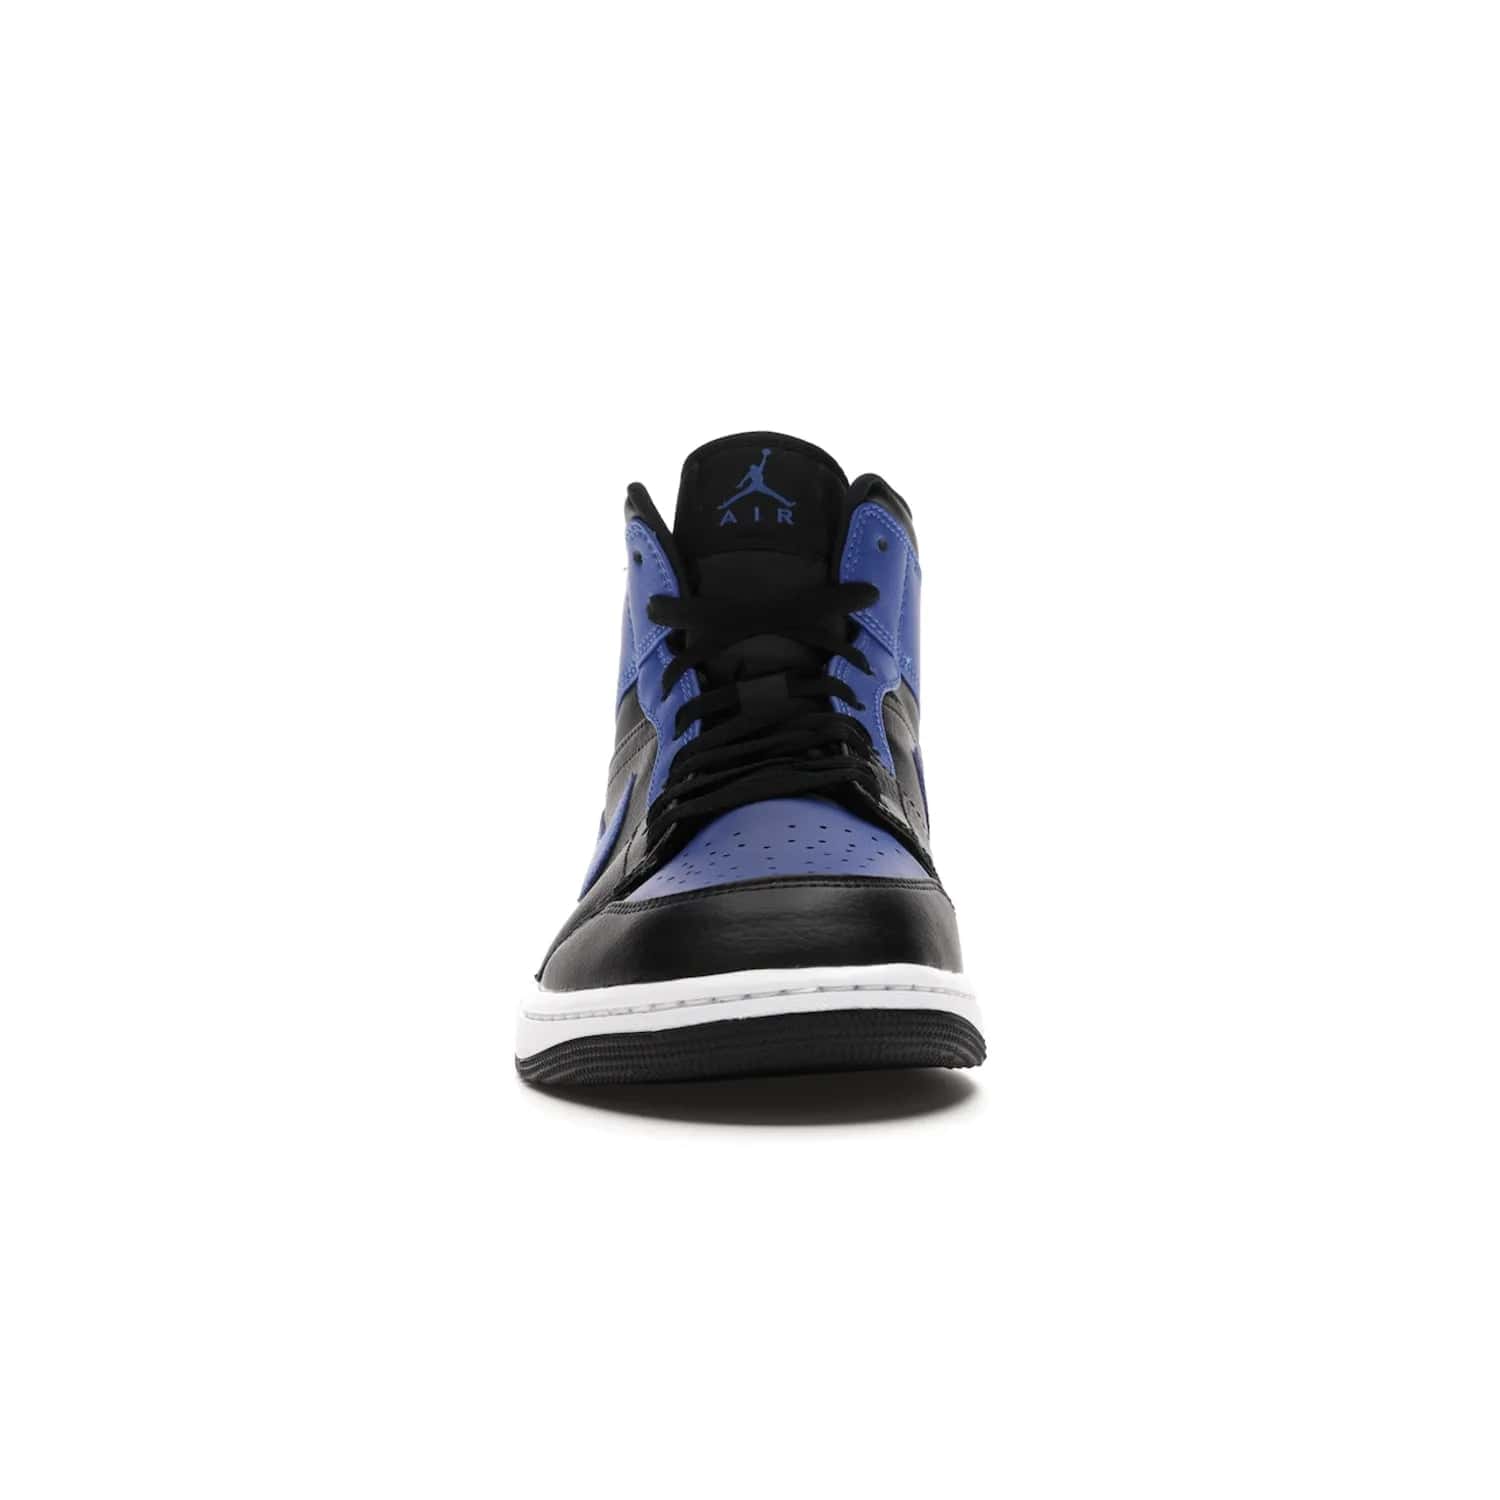 Jordan 1 Mid Hyper Royal Tumbled Leather - Image 10 - Only at www.BallersClubKickz.com - Iconic colorway of the Air Jordan 1 Mid Black Royal Tumbled Leather. Features a black tumbled leather upper, royal blue leather overlays, white midsole & black rubber outsole. Released December 2020. Adds premium style to any collection.